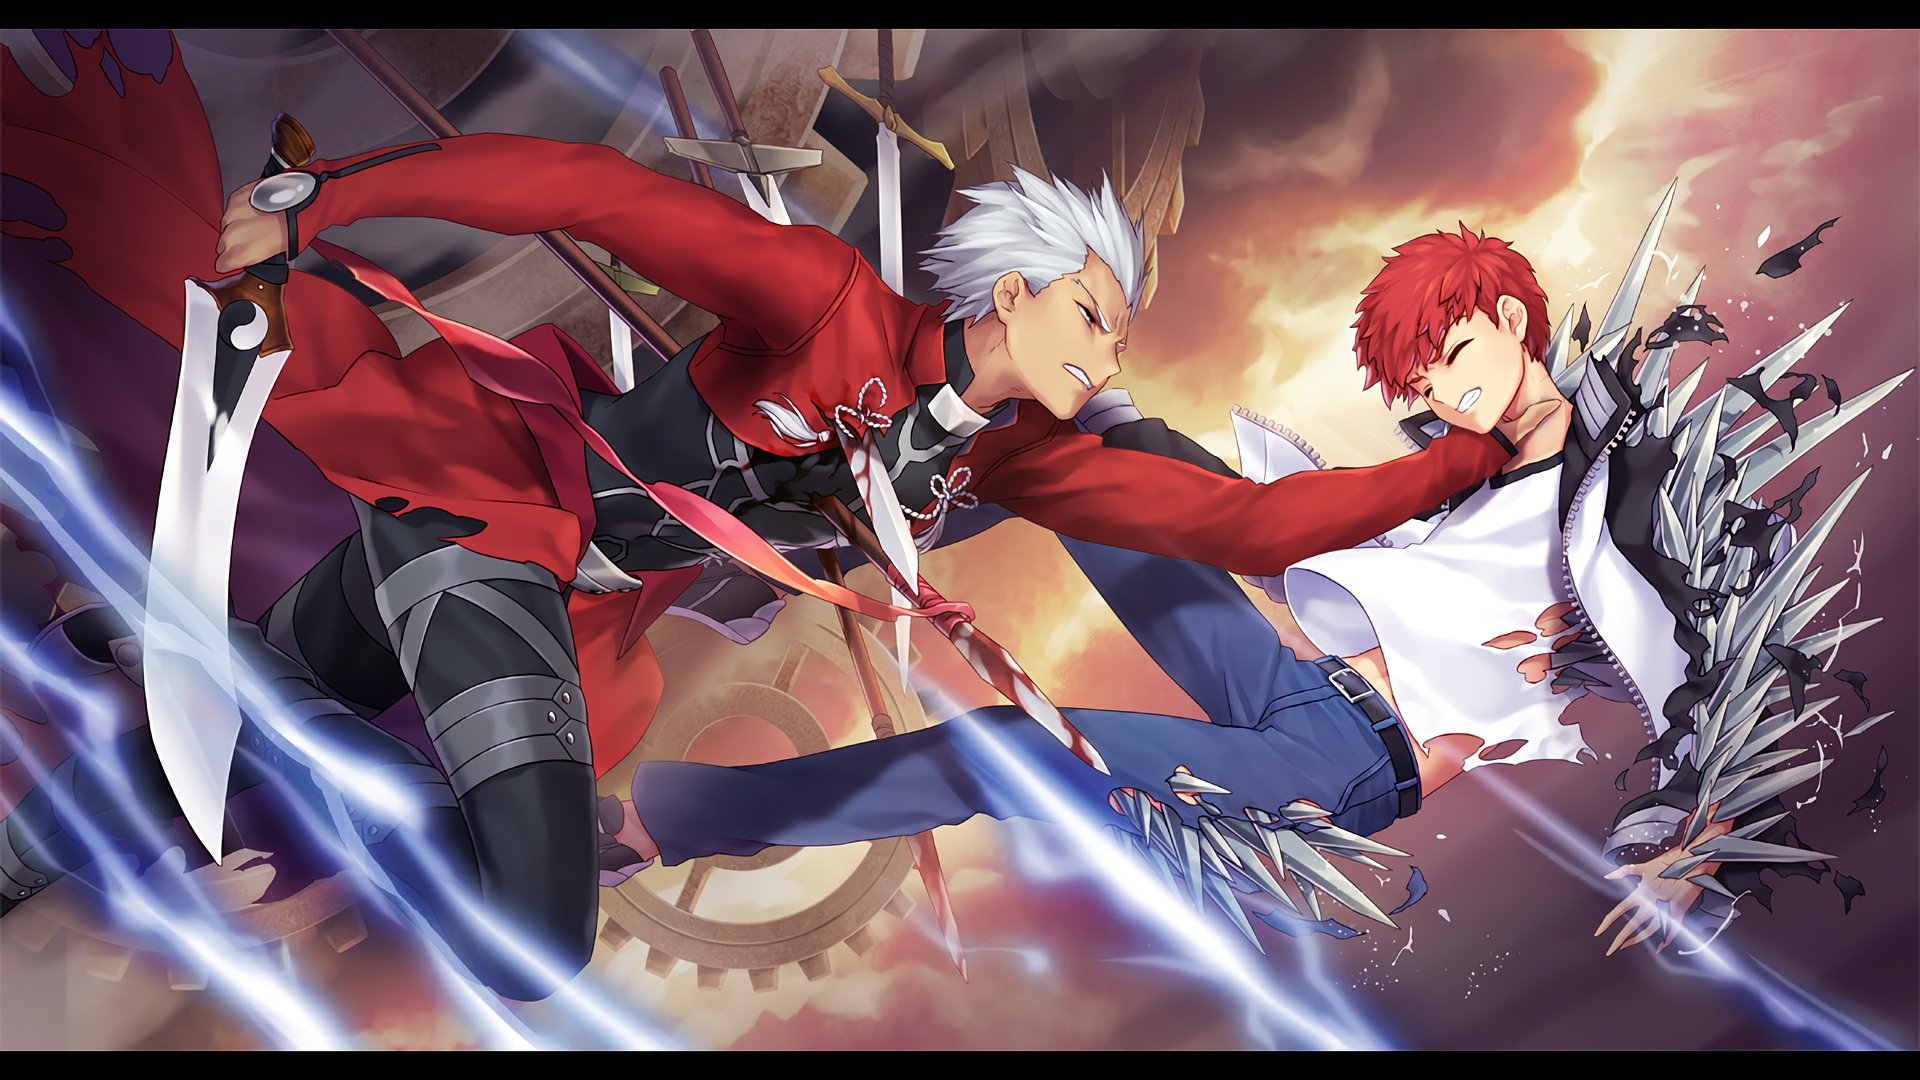 Anime Fate/Stay Night HD Wallpaper by BBorong (Pixiv)